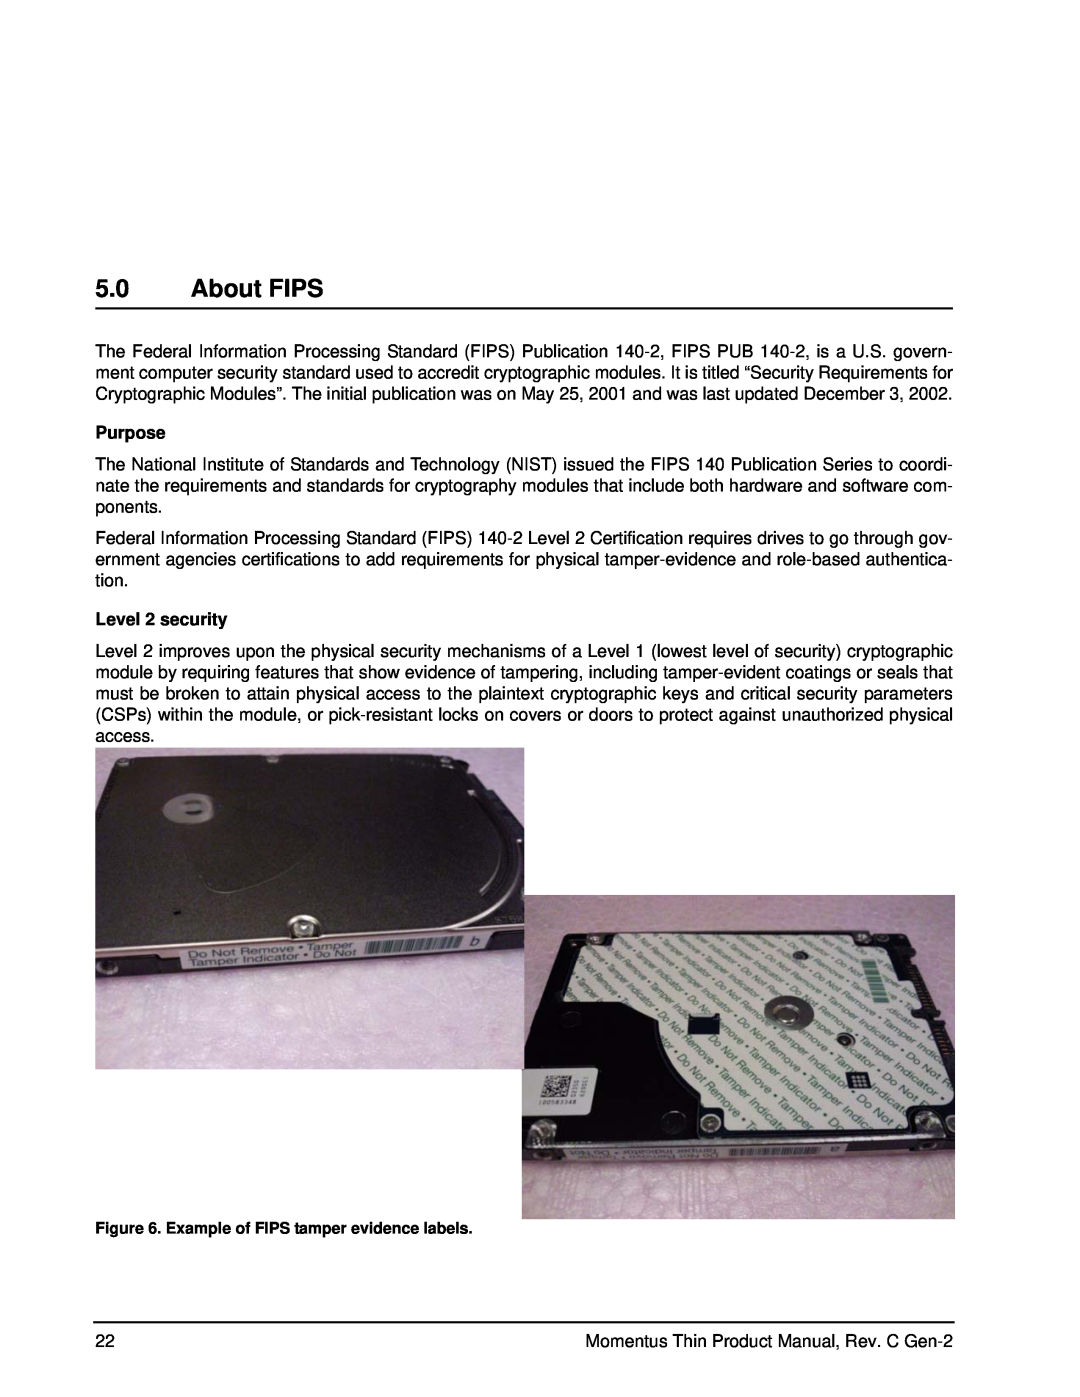 Seagate ST250LT007 - 9ZV14C, ST160LT011 - 9ZVG4D, ST160LT007 - 9ZV14D manual About FIPS, Purpose, Level 2 security 